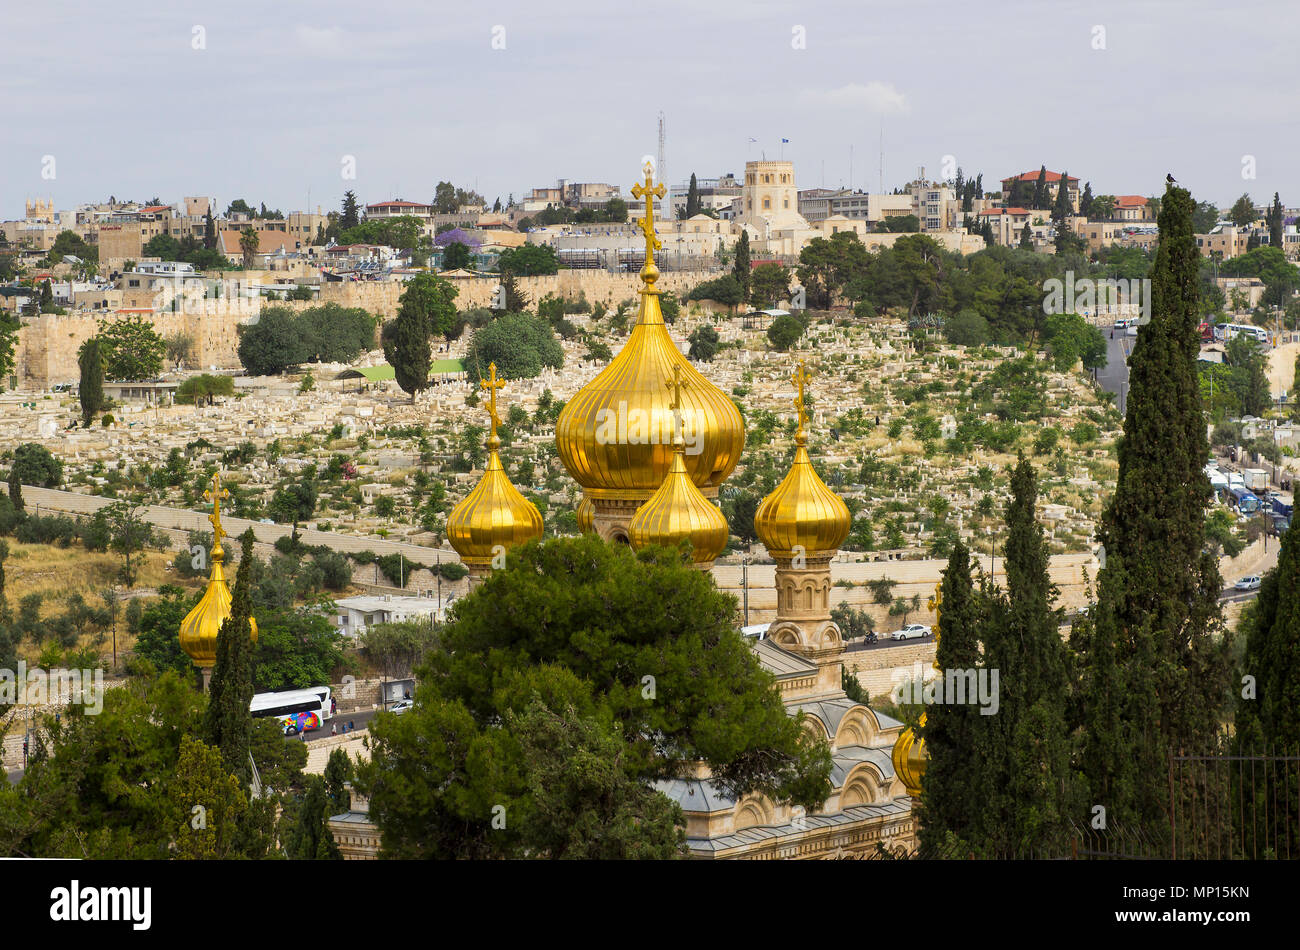 The golden rooftops of the towers on the ancient Russian Orthodox Church in the City of Jerusalem in Israel seen from the Mount of Olives Stock Photo